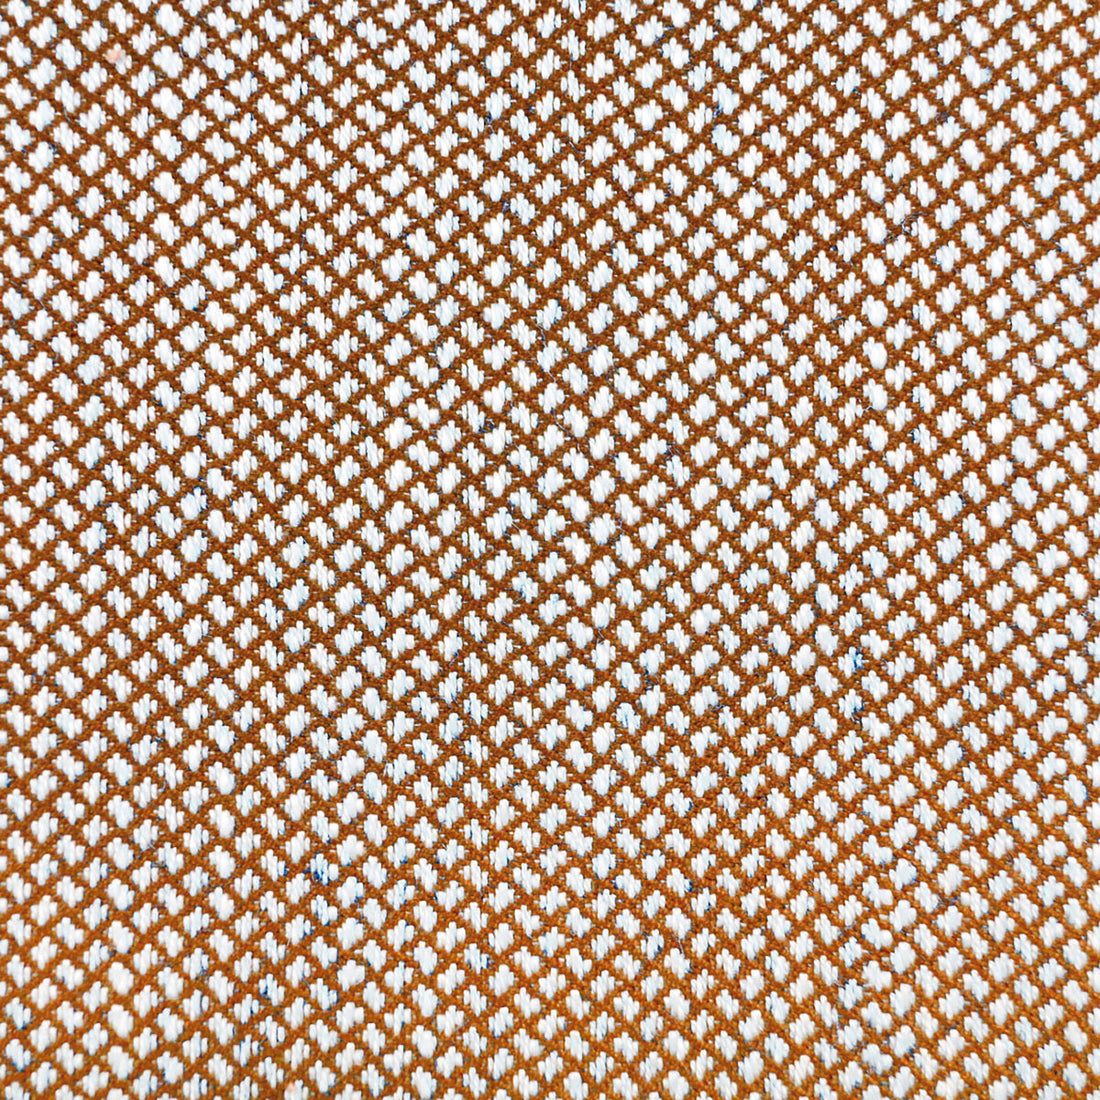 Sabuki fabric in cobre color - pattern GDT5638.007.0 - by Gaston y Daniela in the Gaston Japon collection